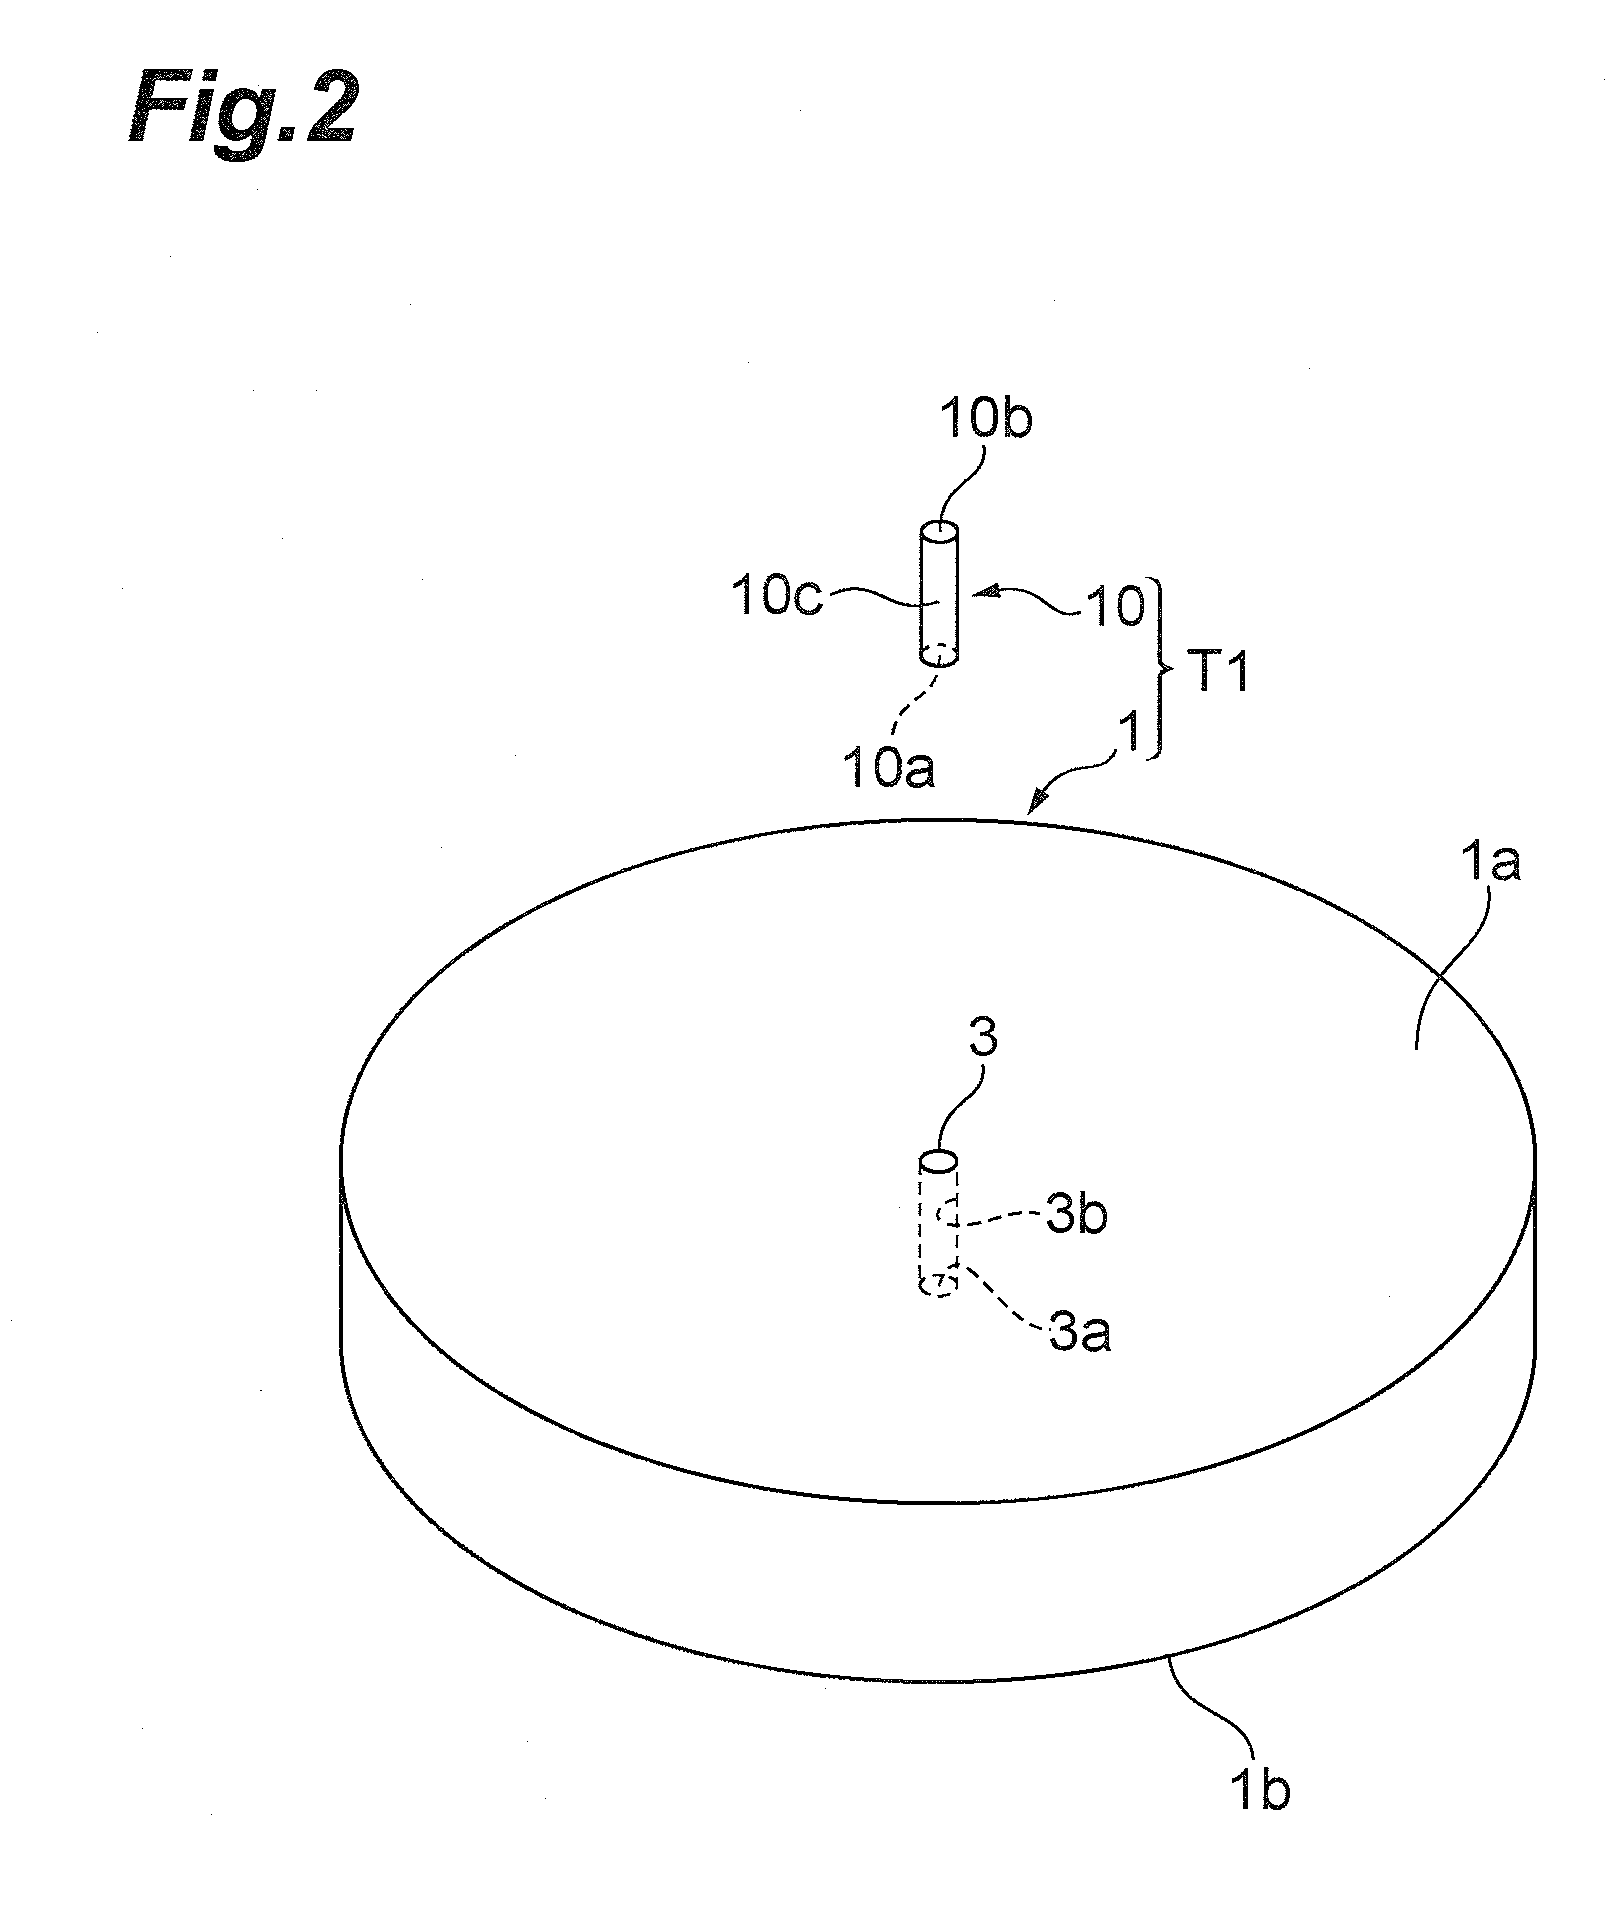 Target for x-ray generation, x-ray generator, and method for producing target for x-ray generation